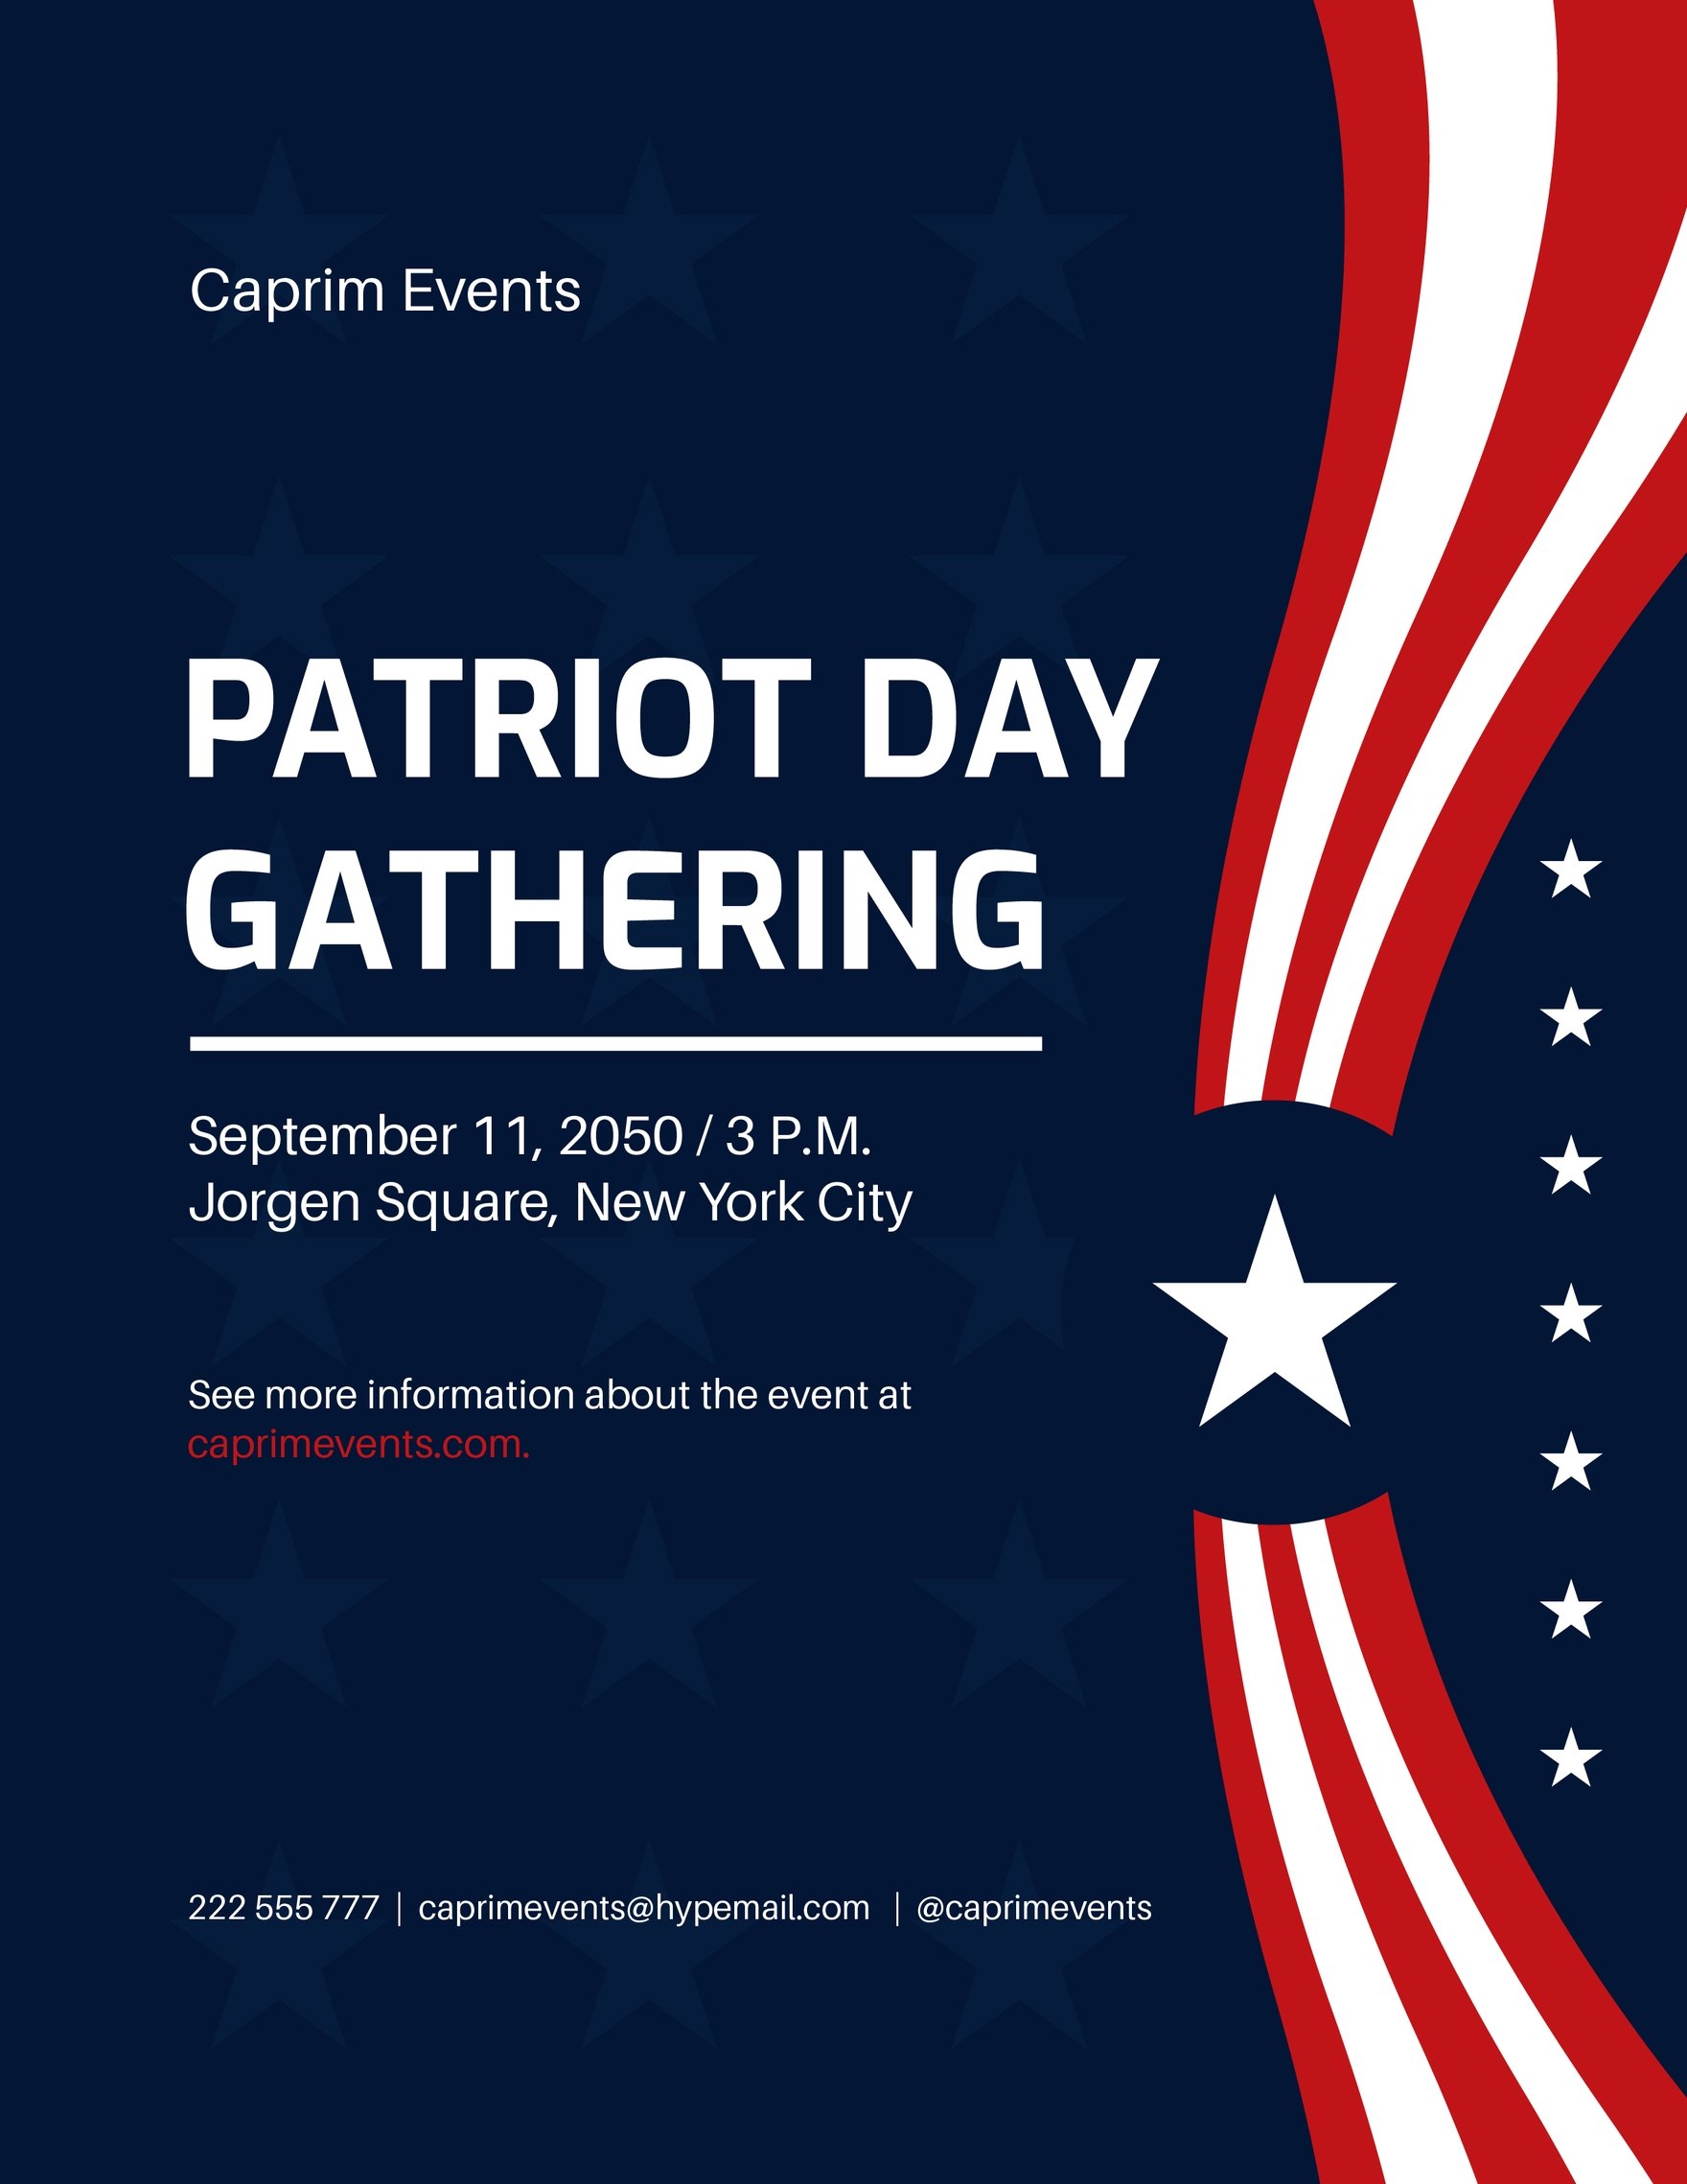 Patriot Day Event Flyer in Word, Google Docs, Illustrator, PSD, Apple Pages, Publisher